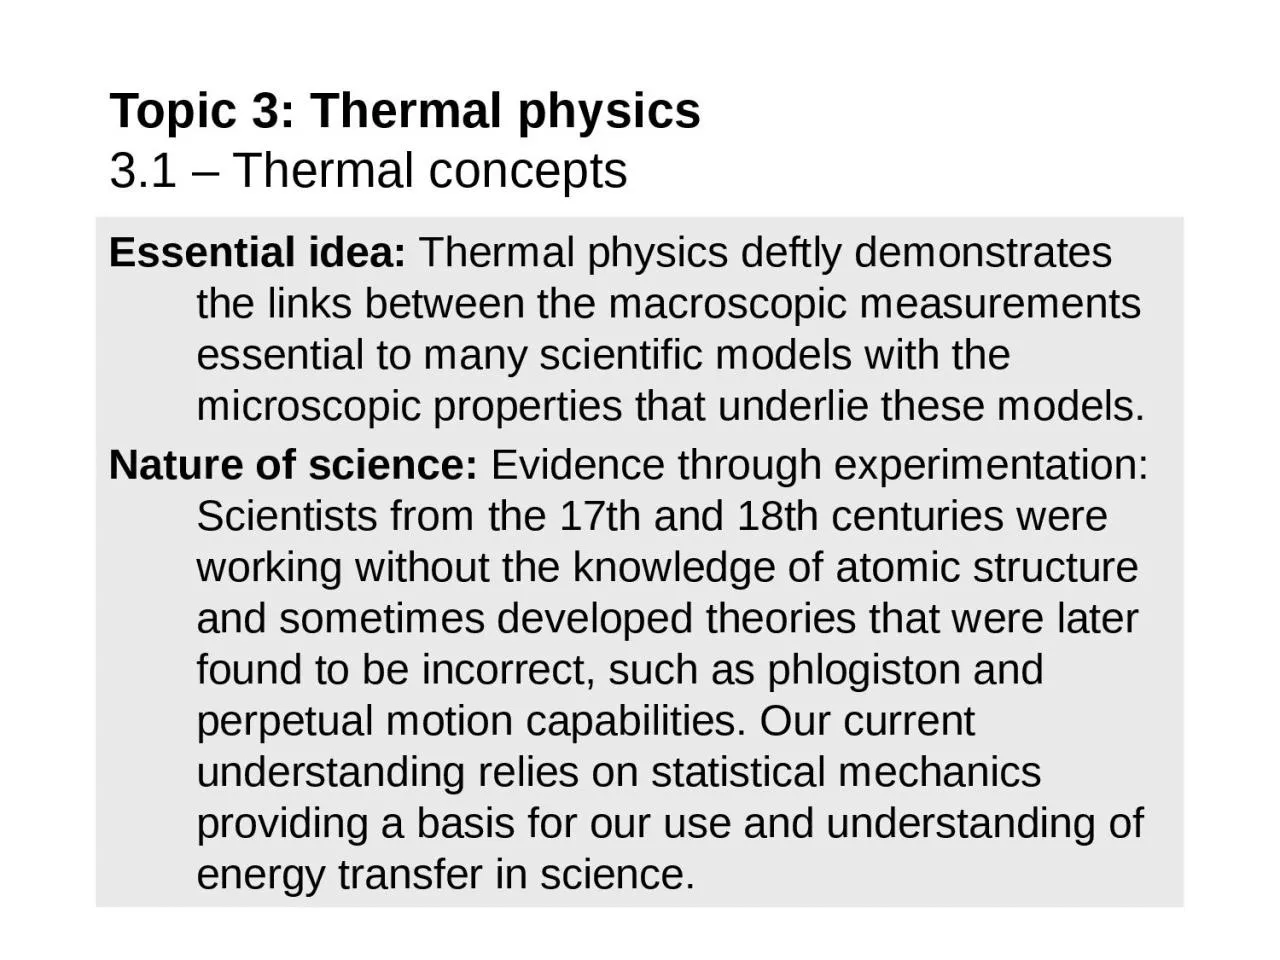 Essential idea:  Thermal physics deftly demonstrates the links between the macroscopic